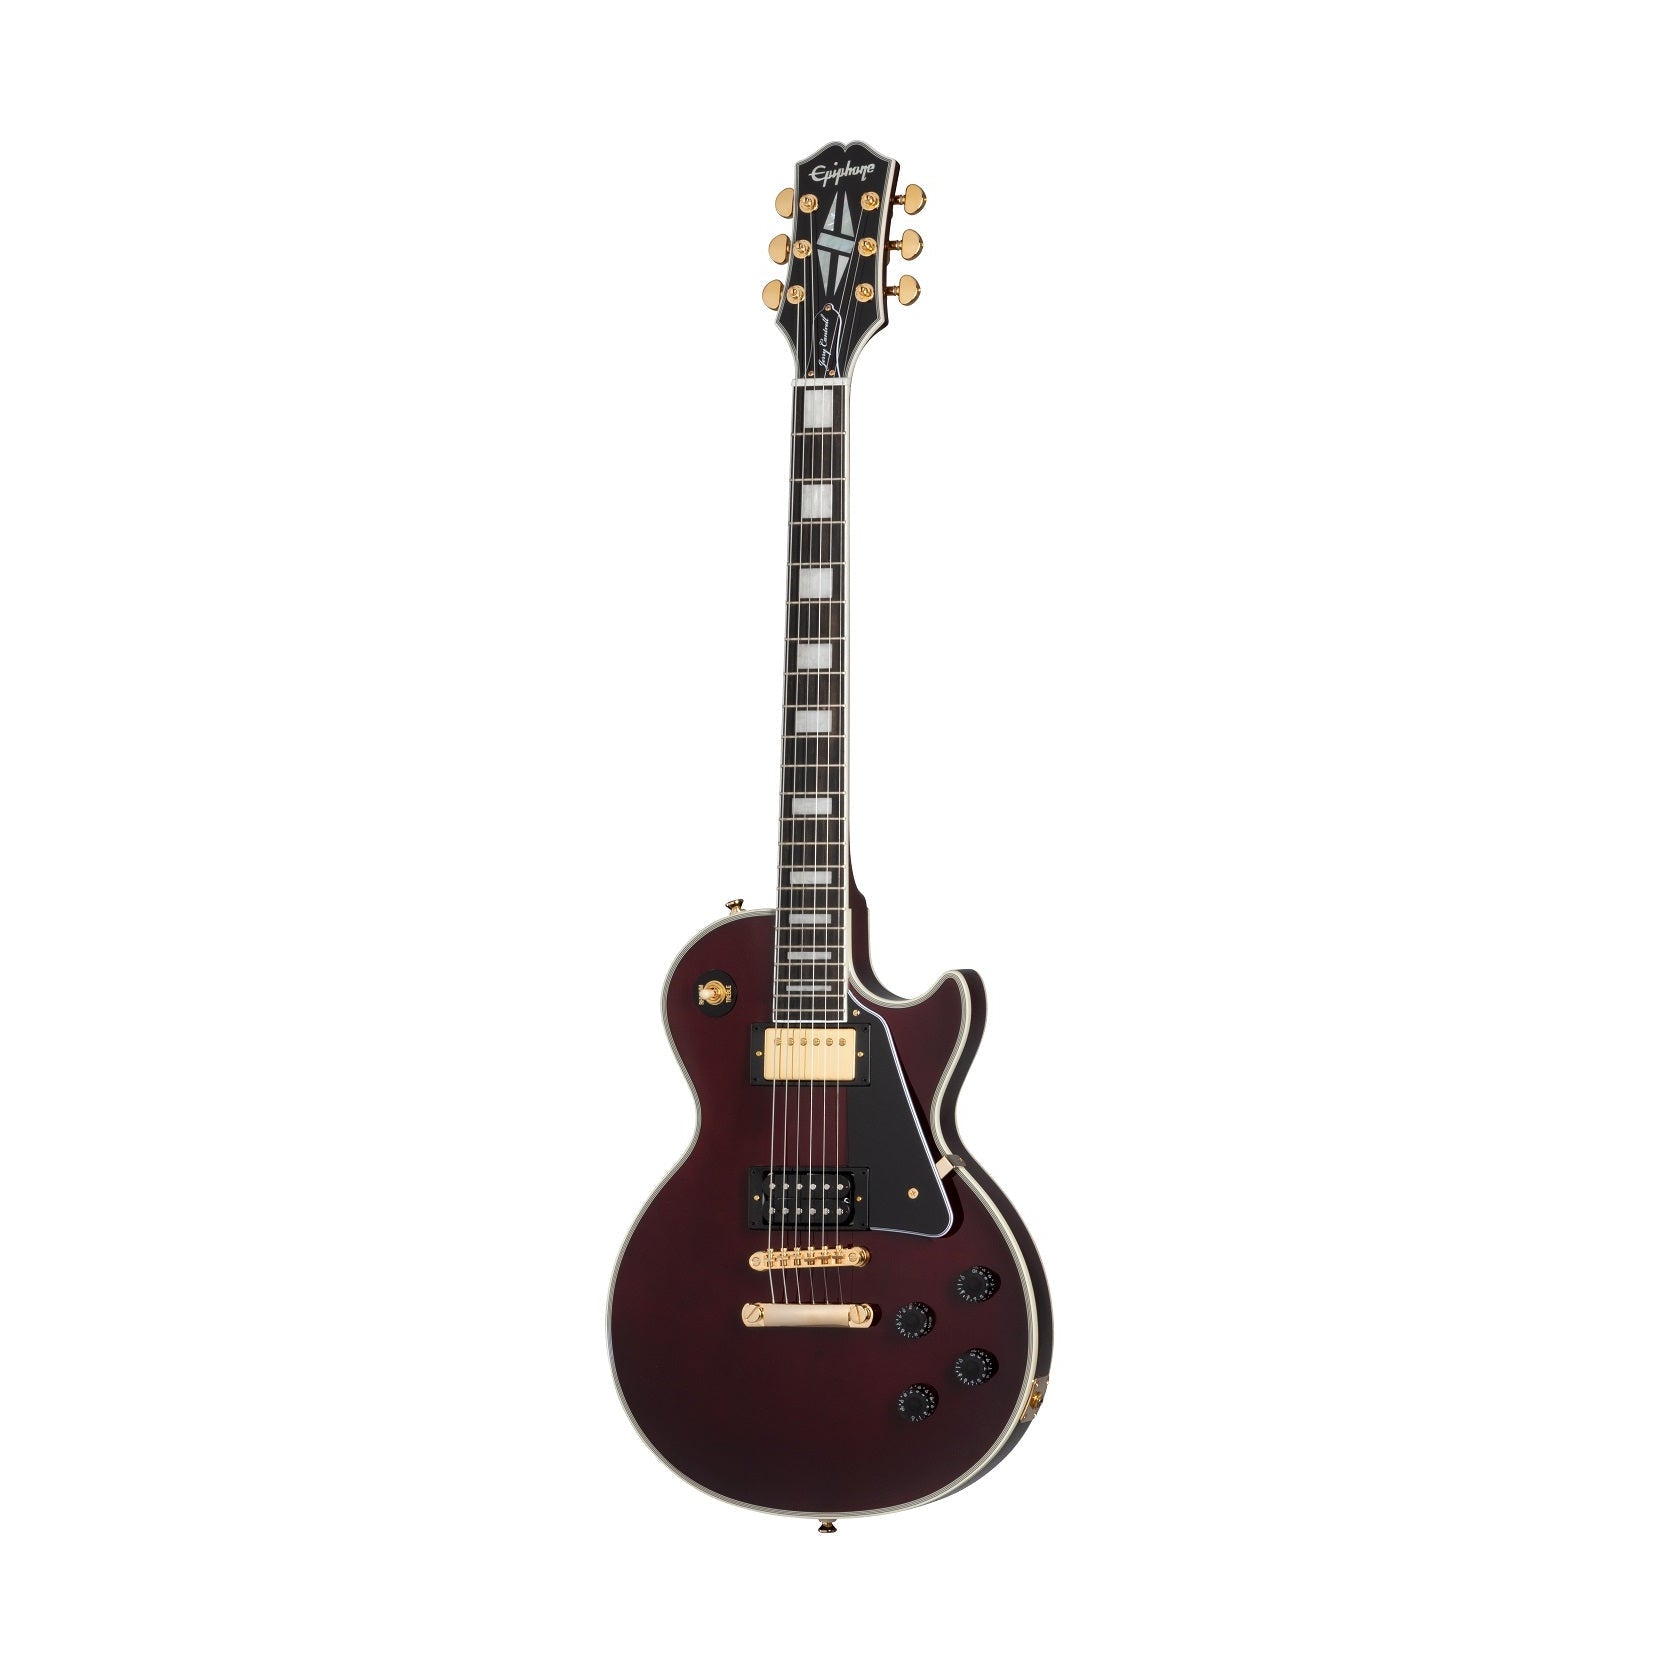 Epiphone EIJCLCWRGH Jerry Cantrell "Wino" Les Paul Custom Electric Guitar with Hardshell Case-Dark Wine Red-Music World Academy